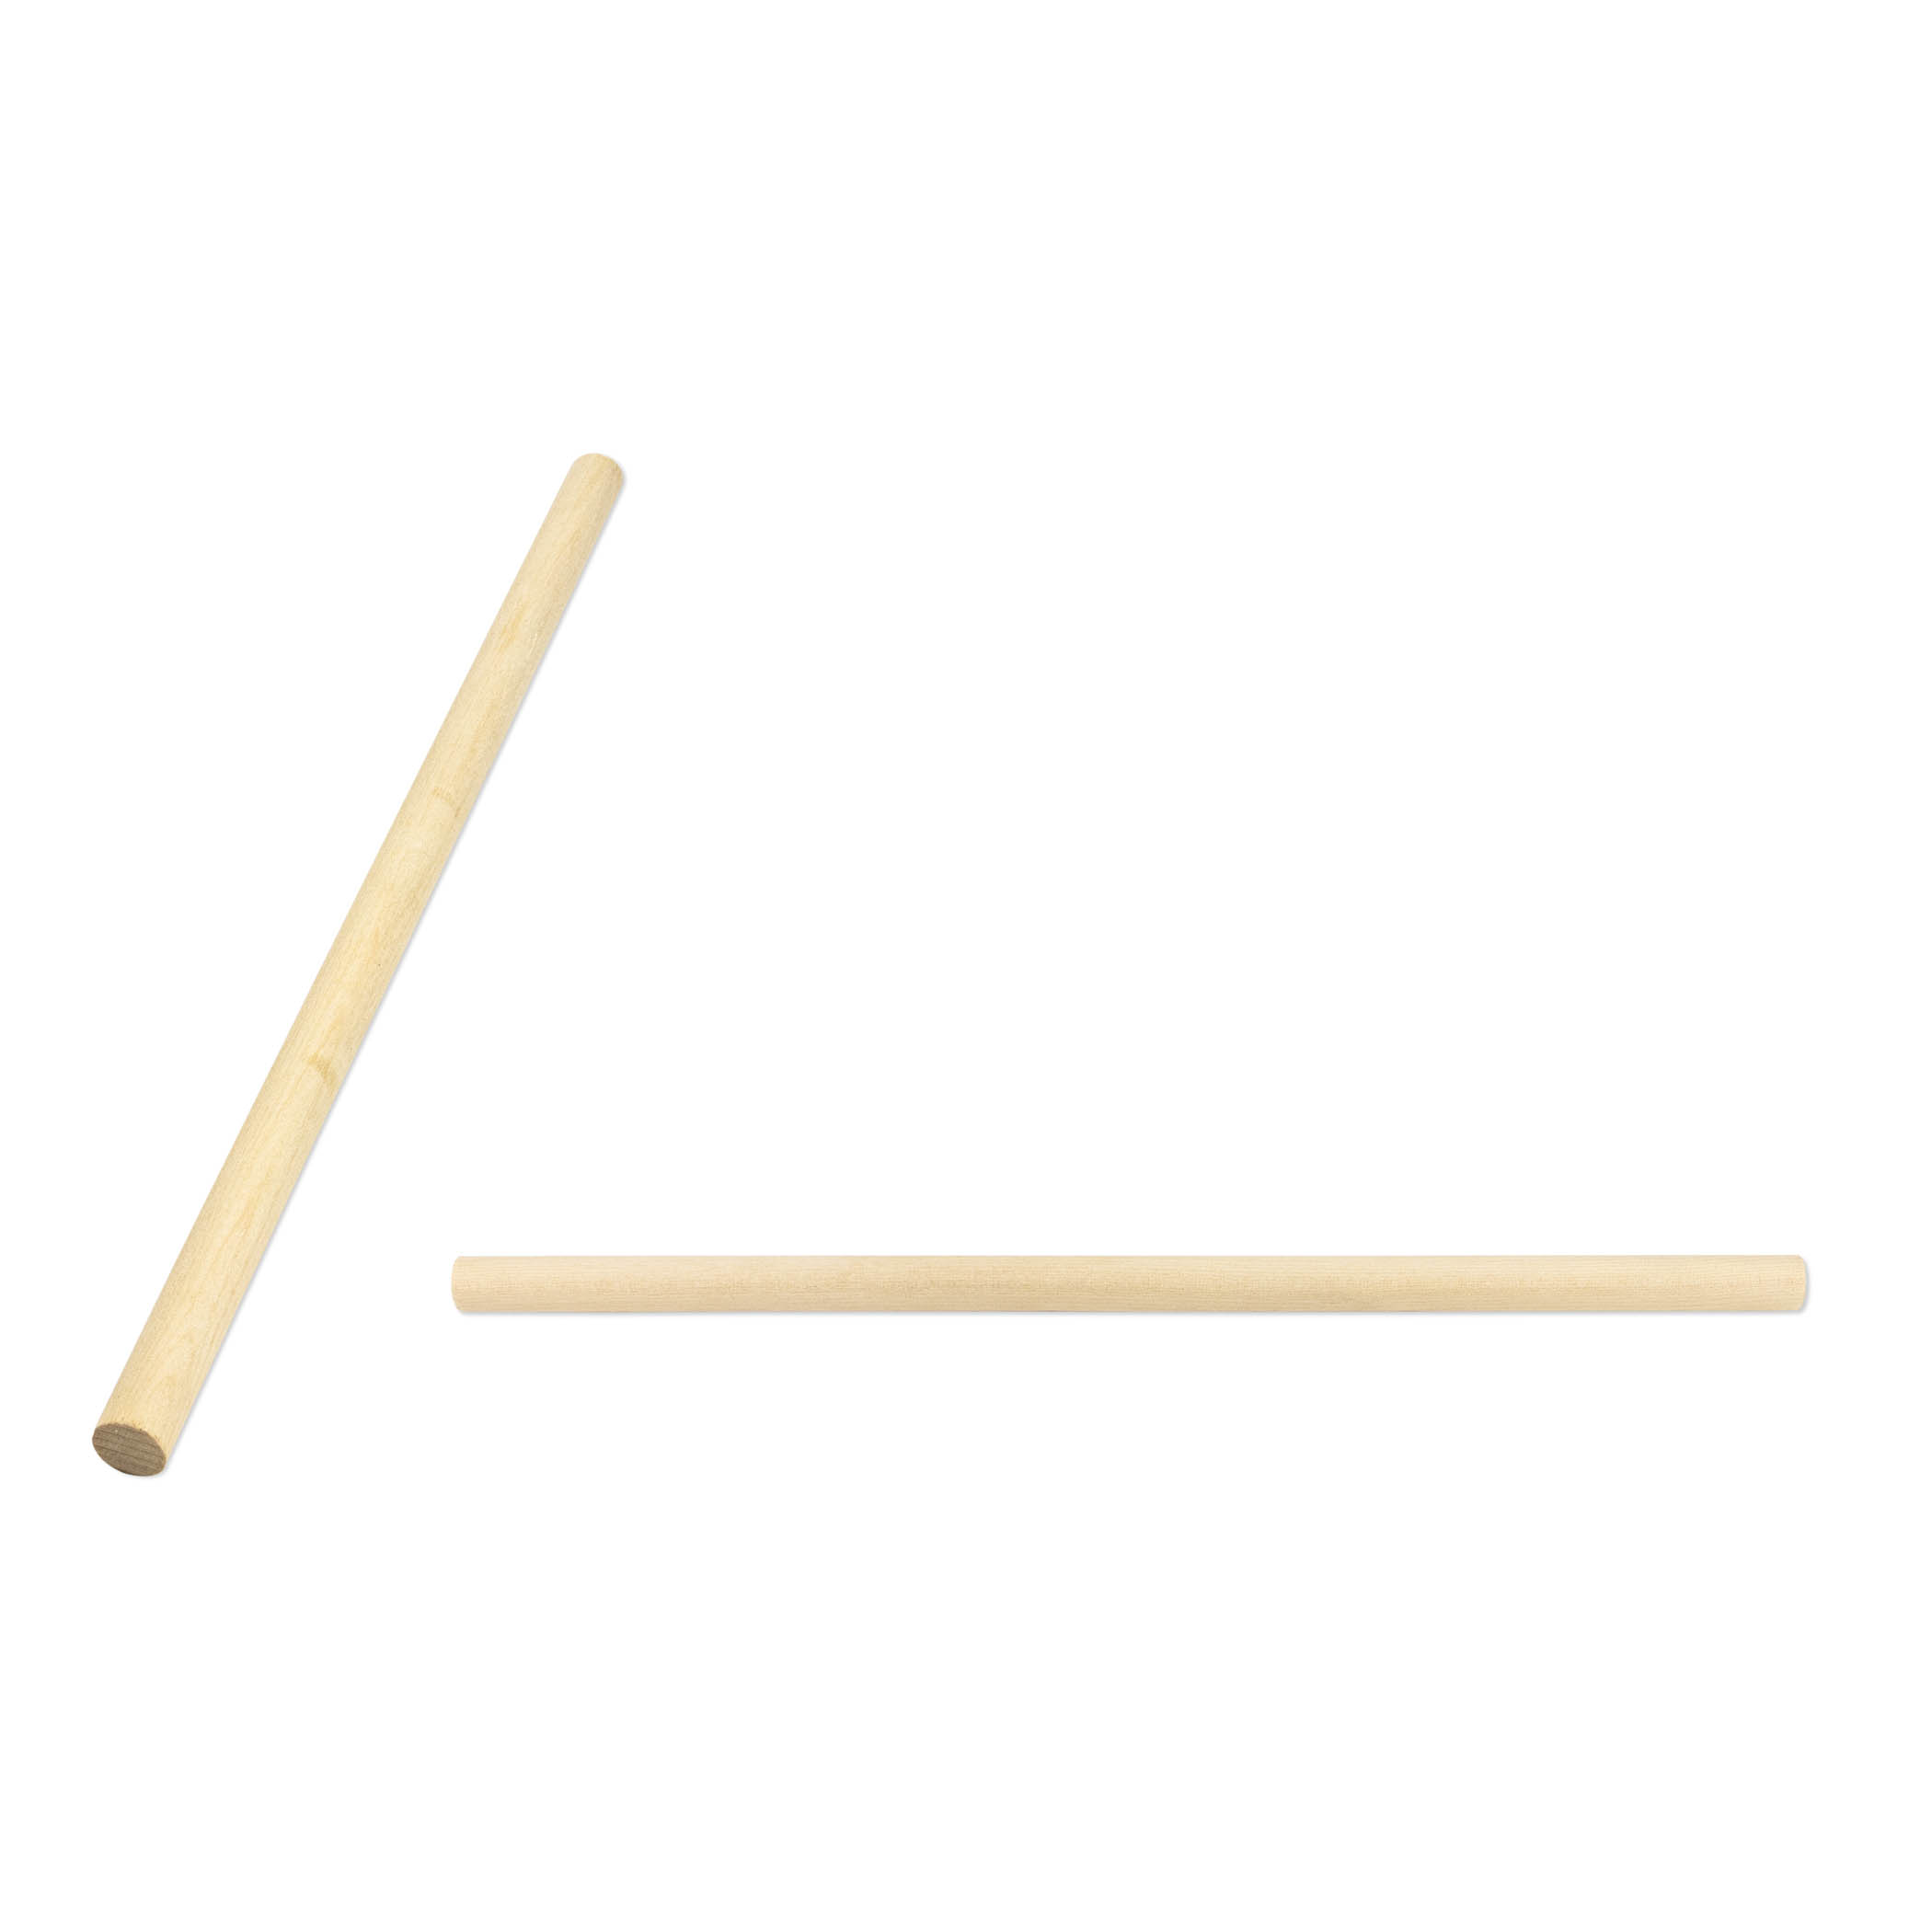 Wood Dowels, 3/8, 25 Pieces - HYG84382, Hygloss Products Inc.